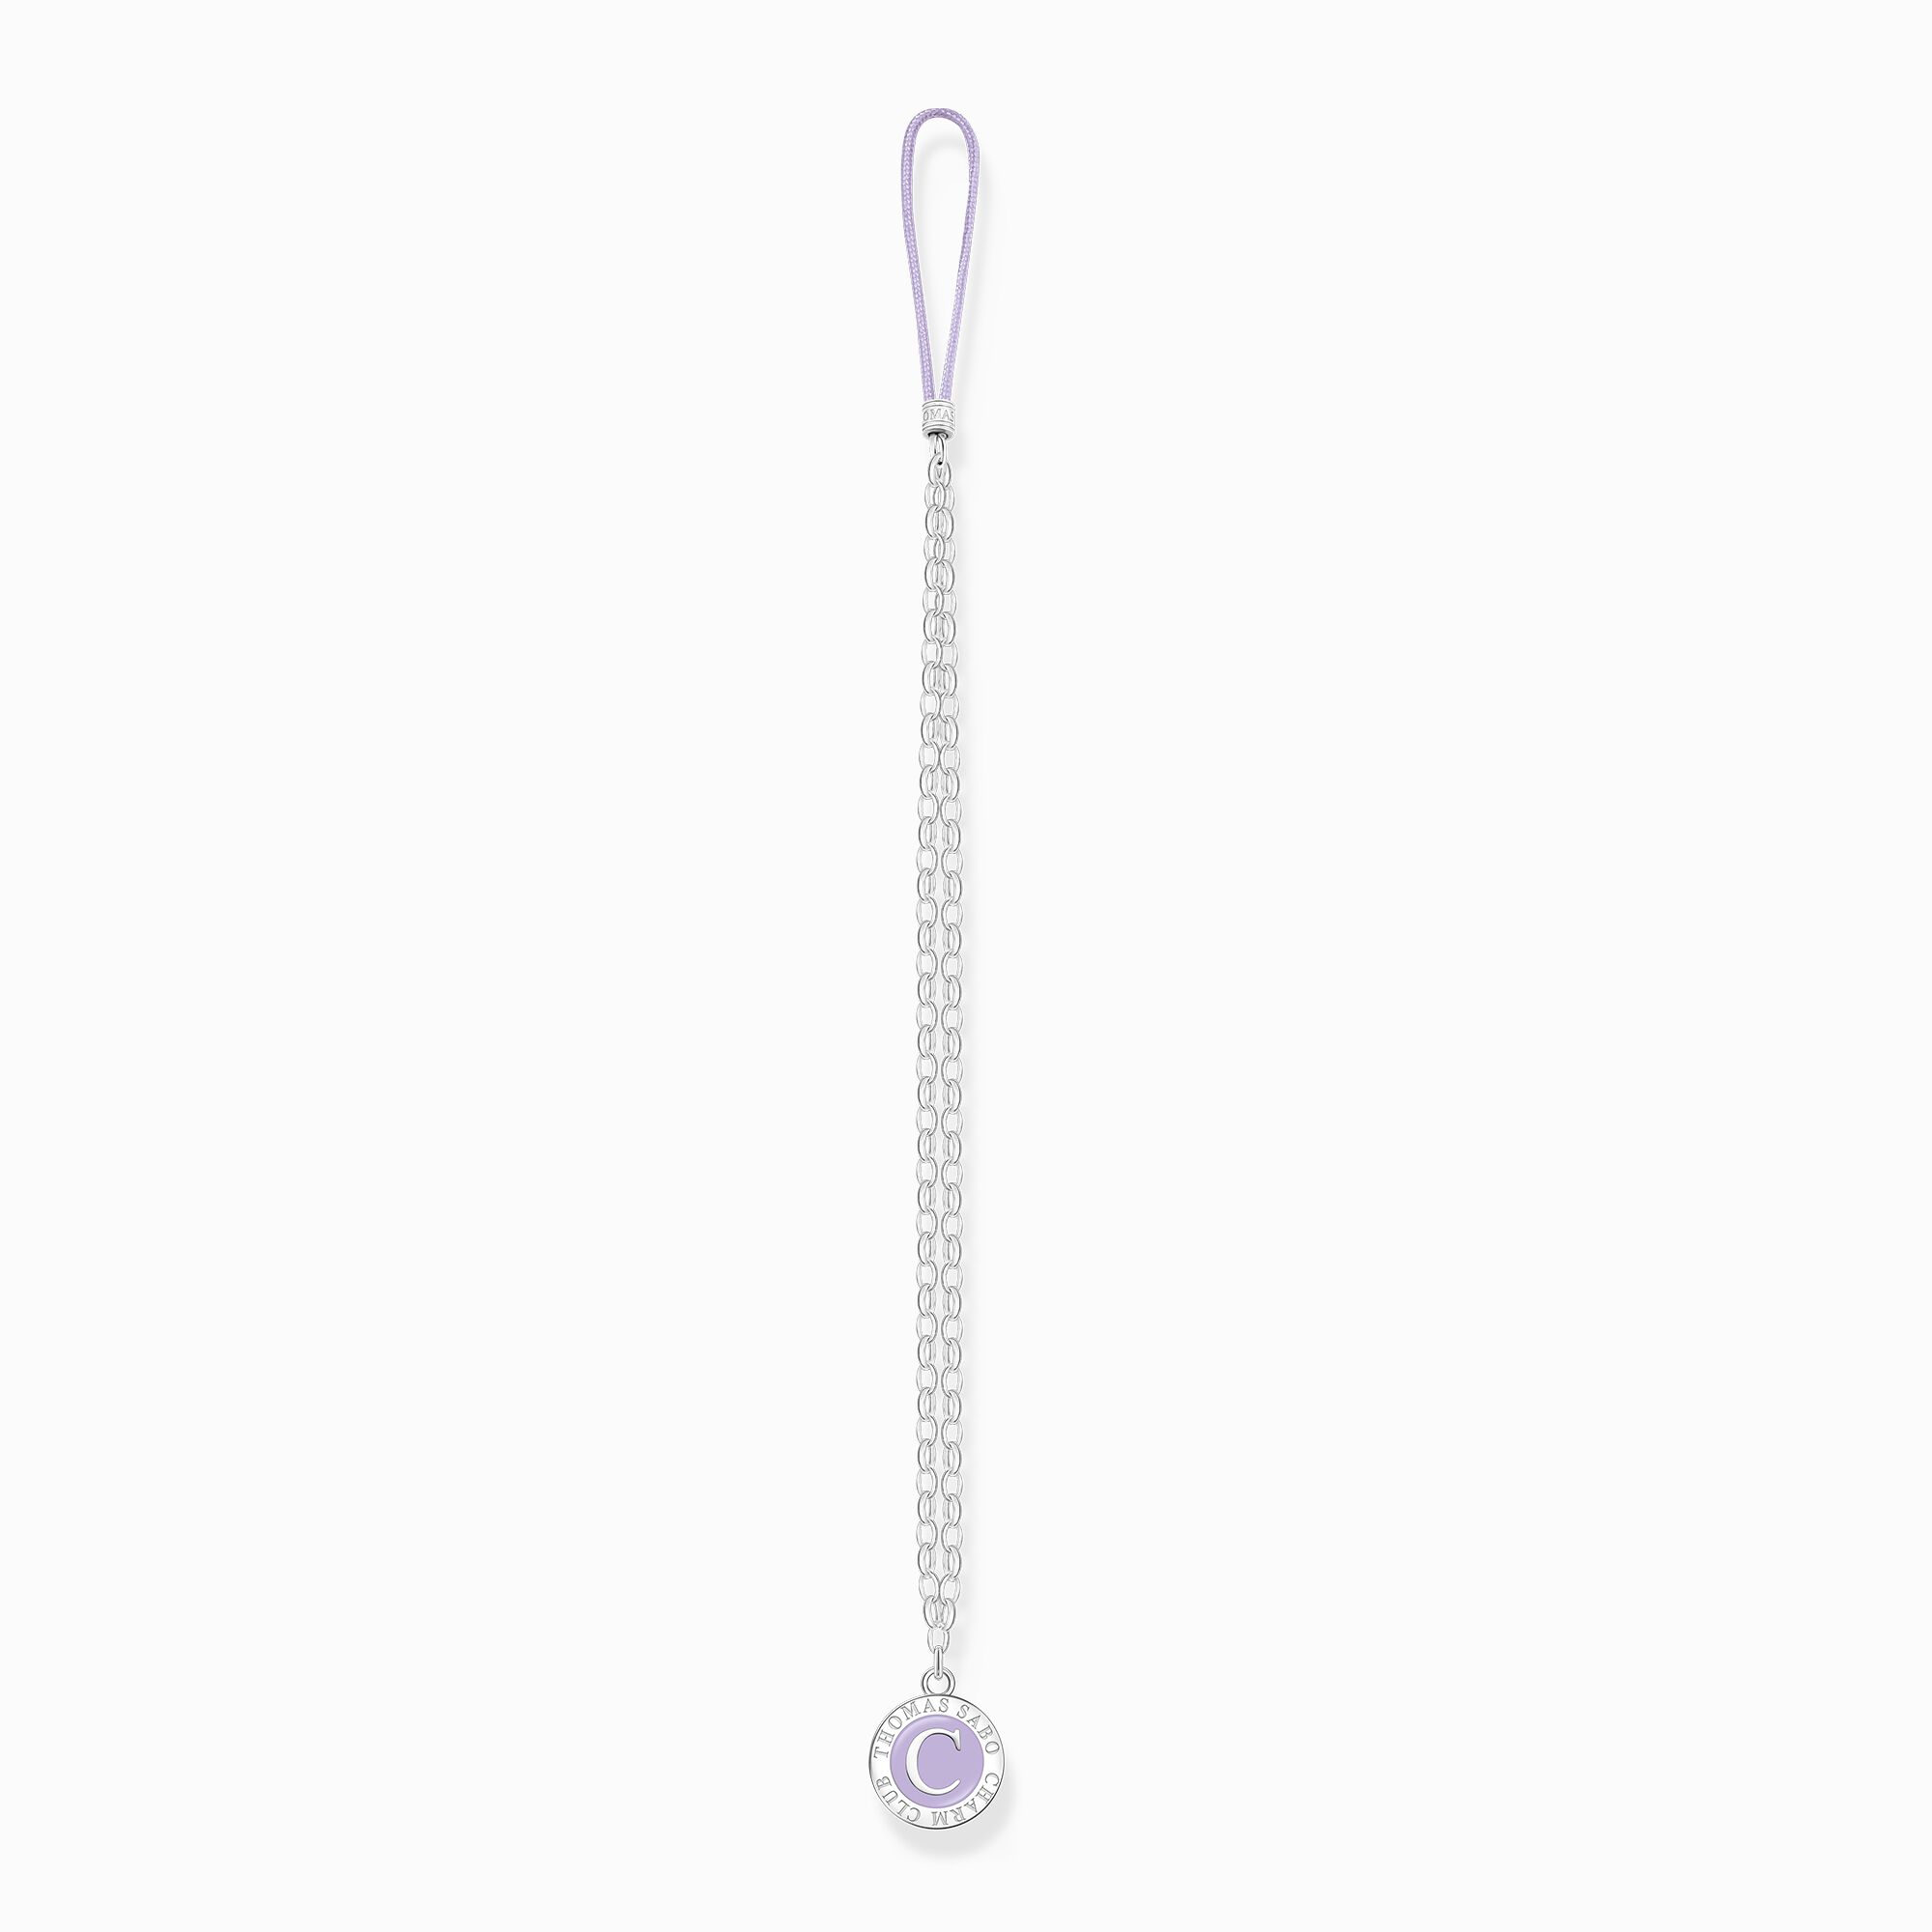 Silver Charm Club long mobile chains with Charmista Coin from the Charm Club collection in the THOMAS SABO online store